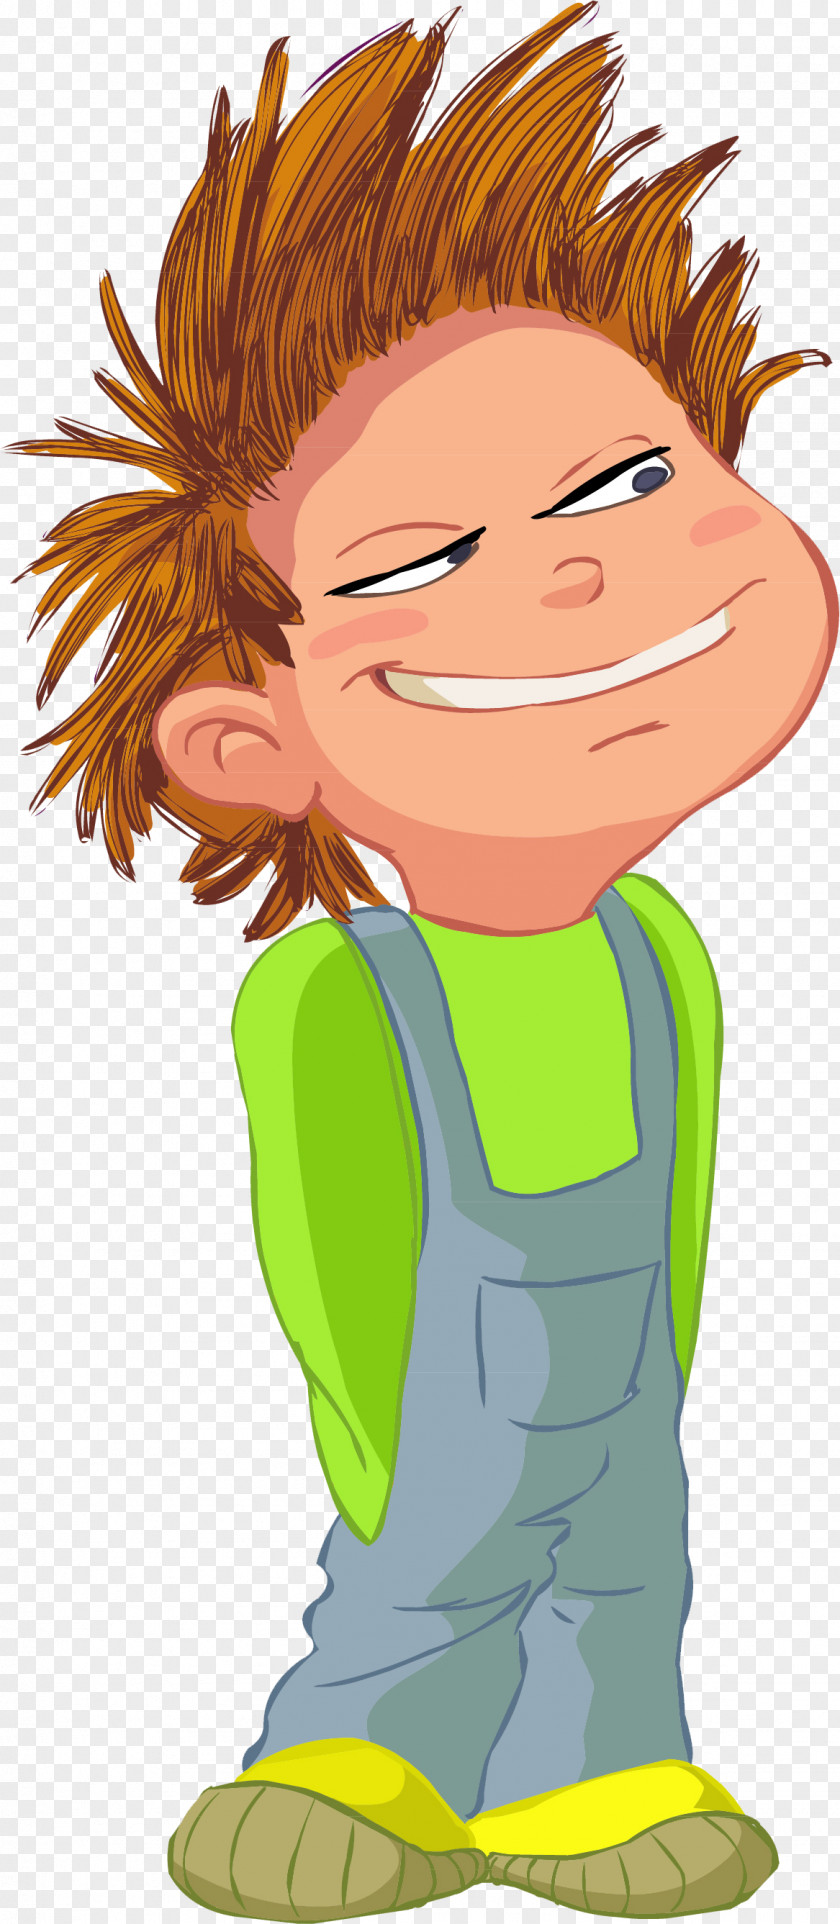 Kids Face Facial Expression Hair Smile PNG